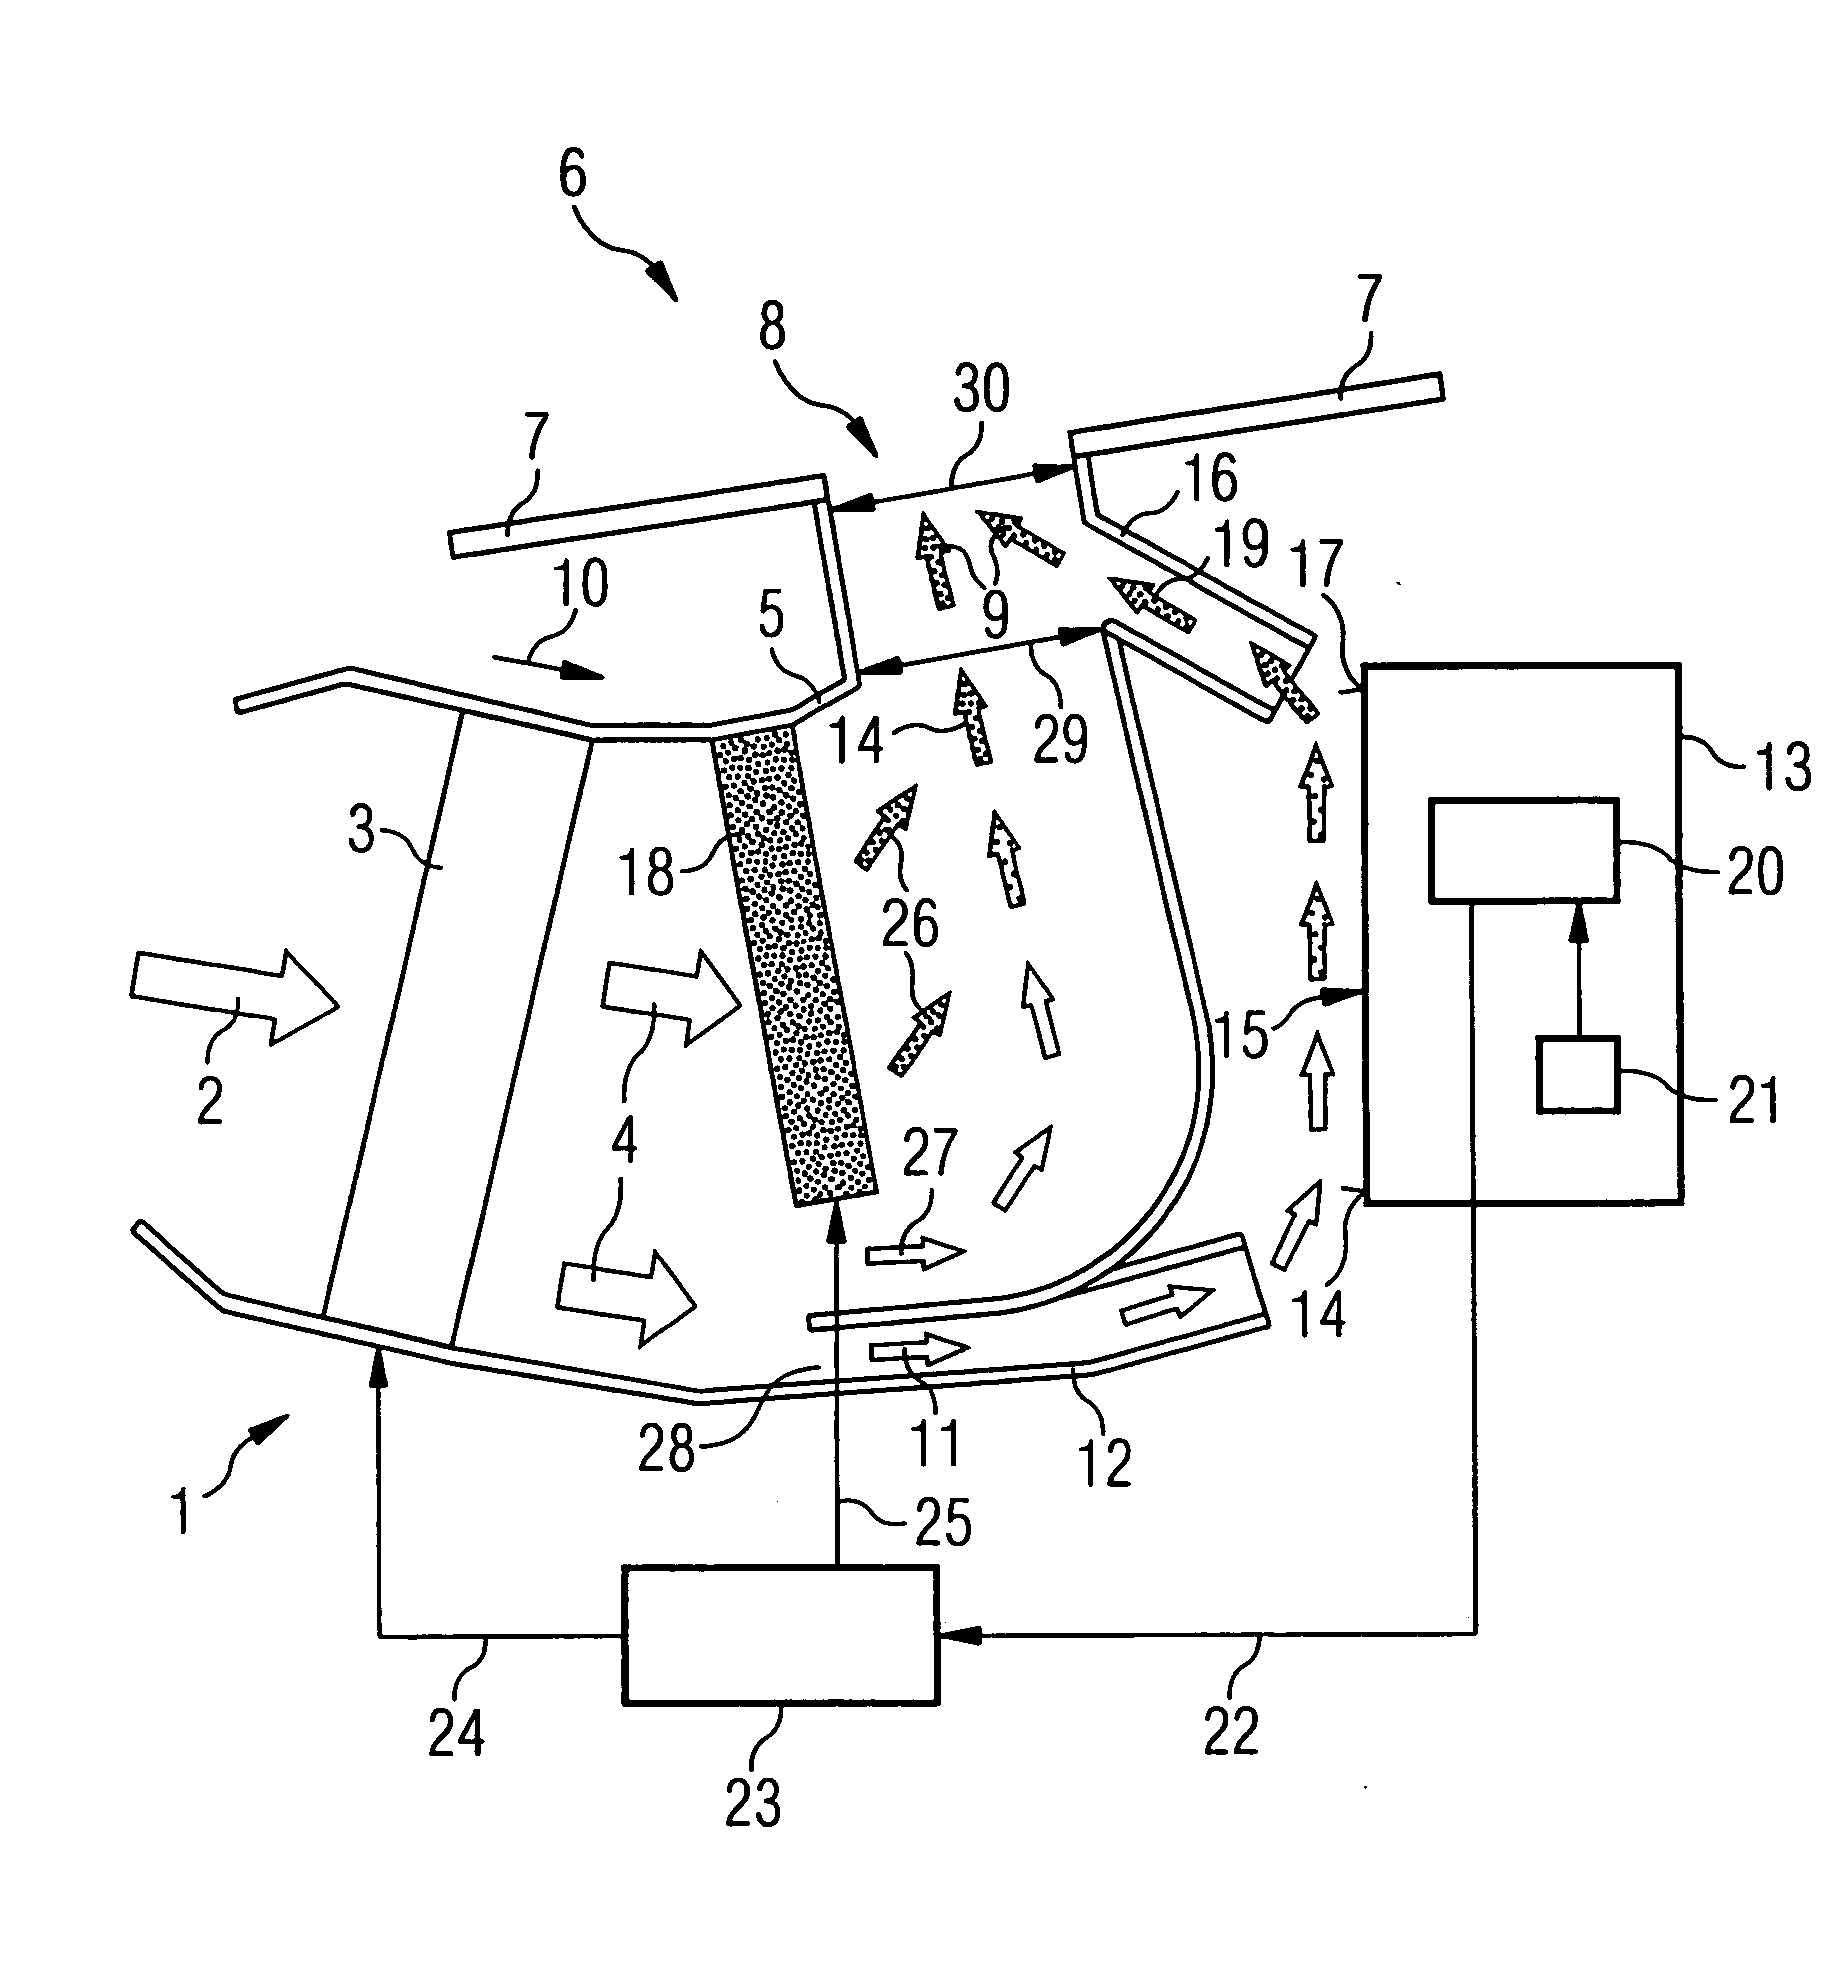 Arrangement for cooling components in a vehicle